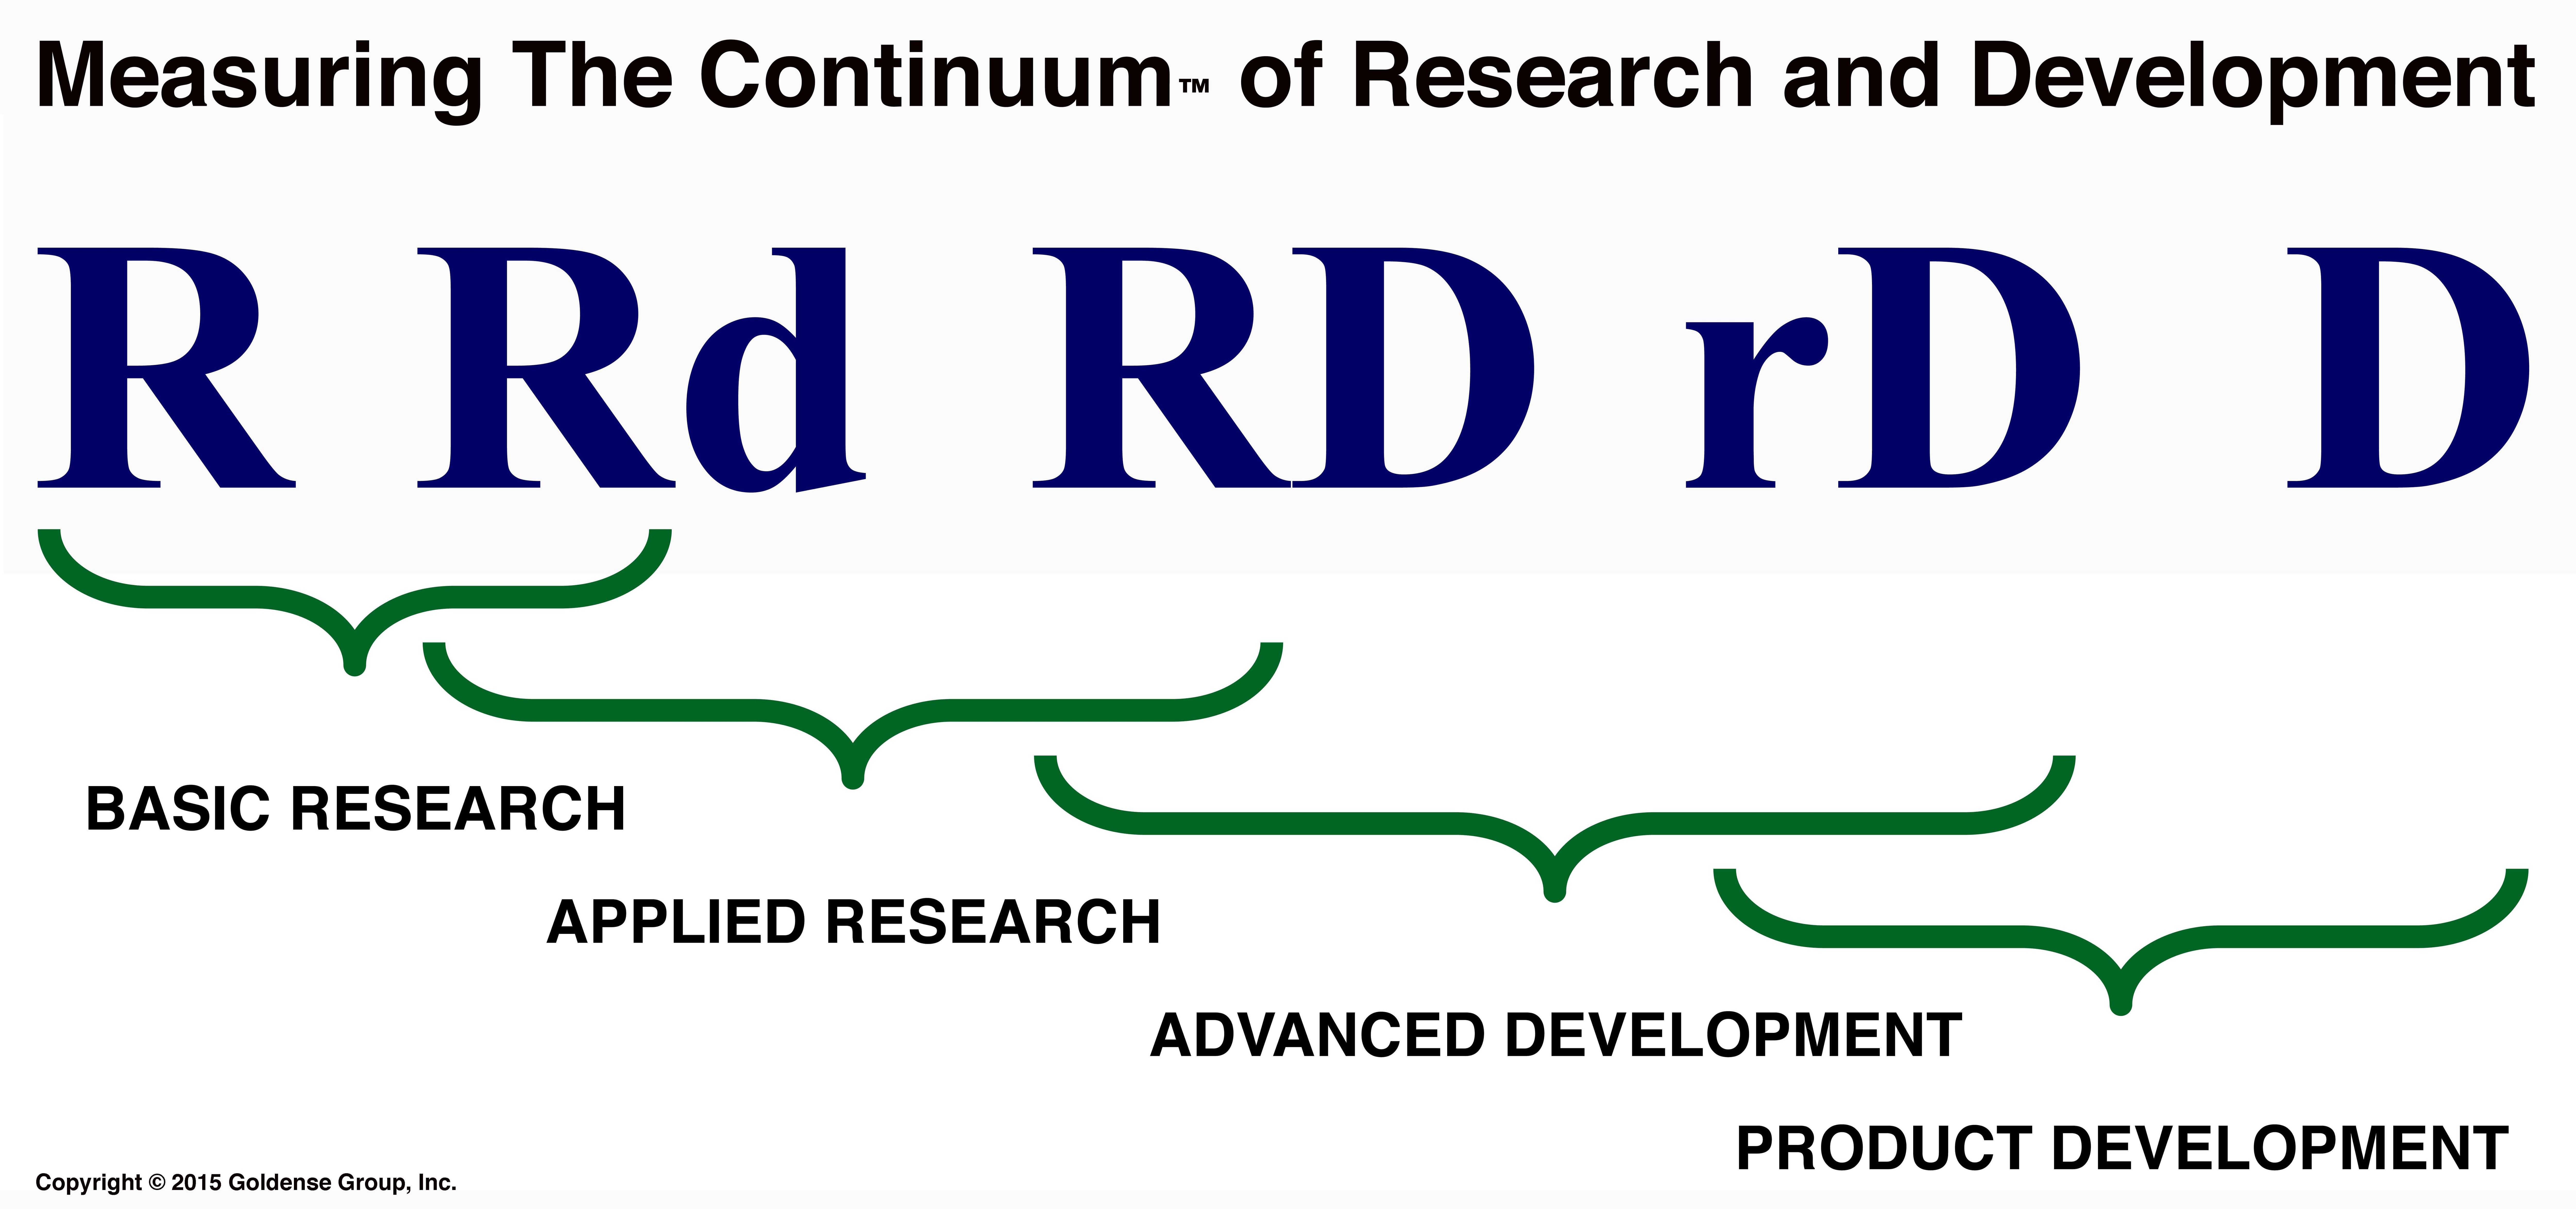 measuring-the-continuum-of-research-and-development.jpg